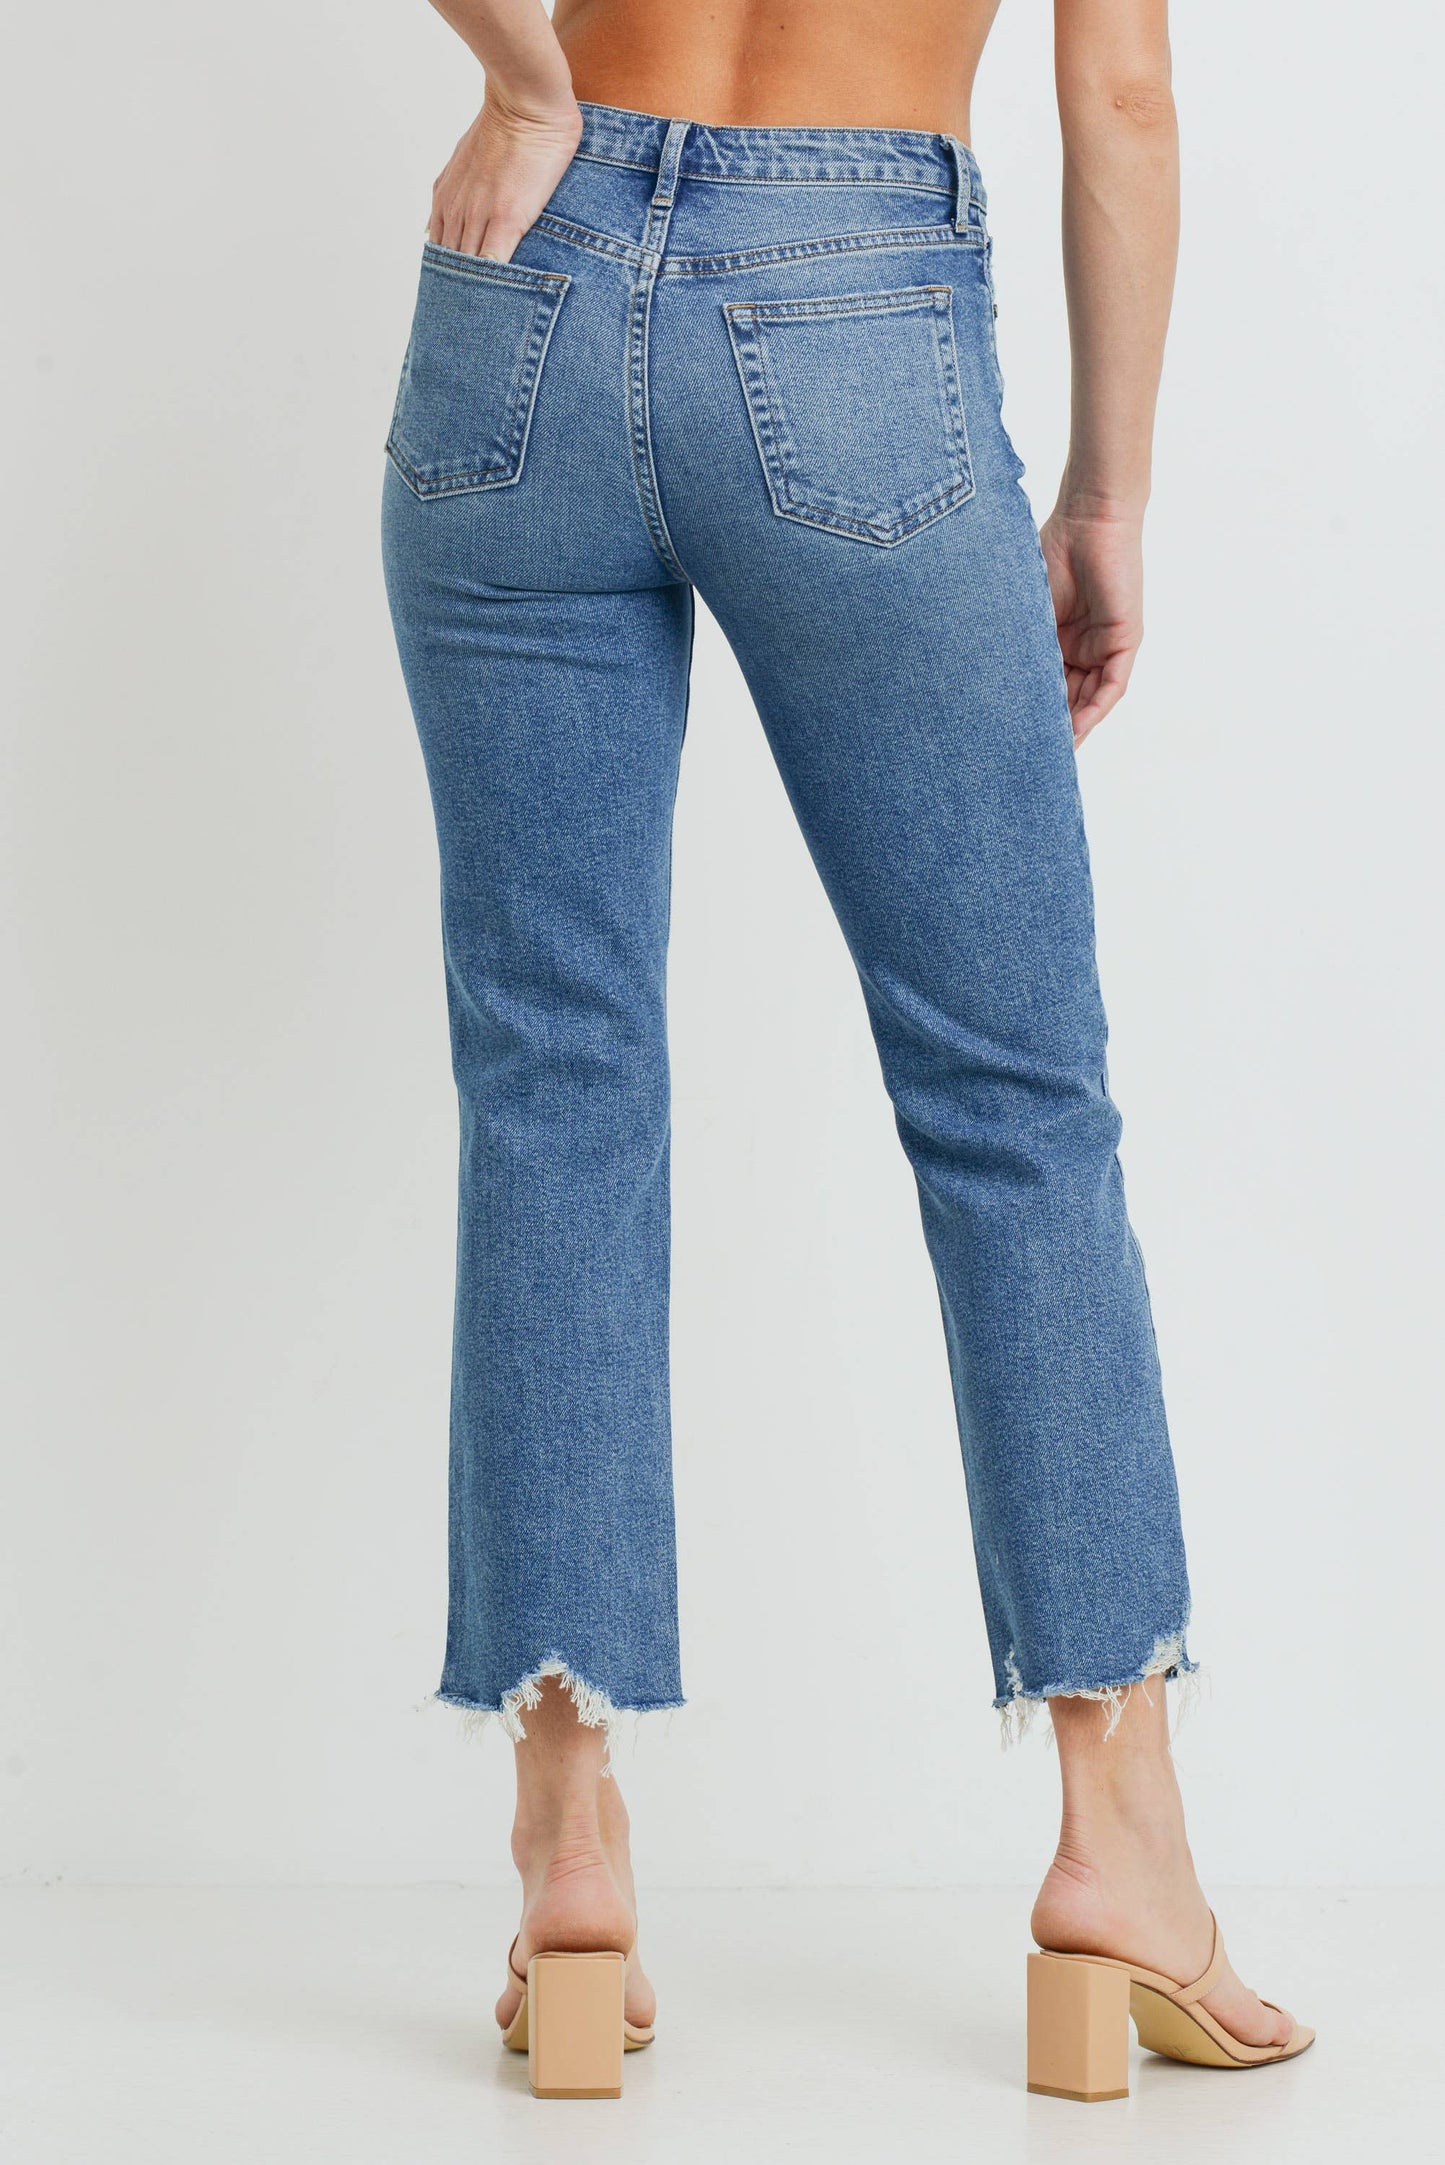 The Vintage Straight Jean - Storm and Sky Shoppe